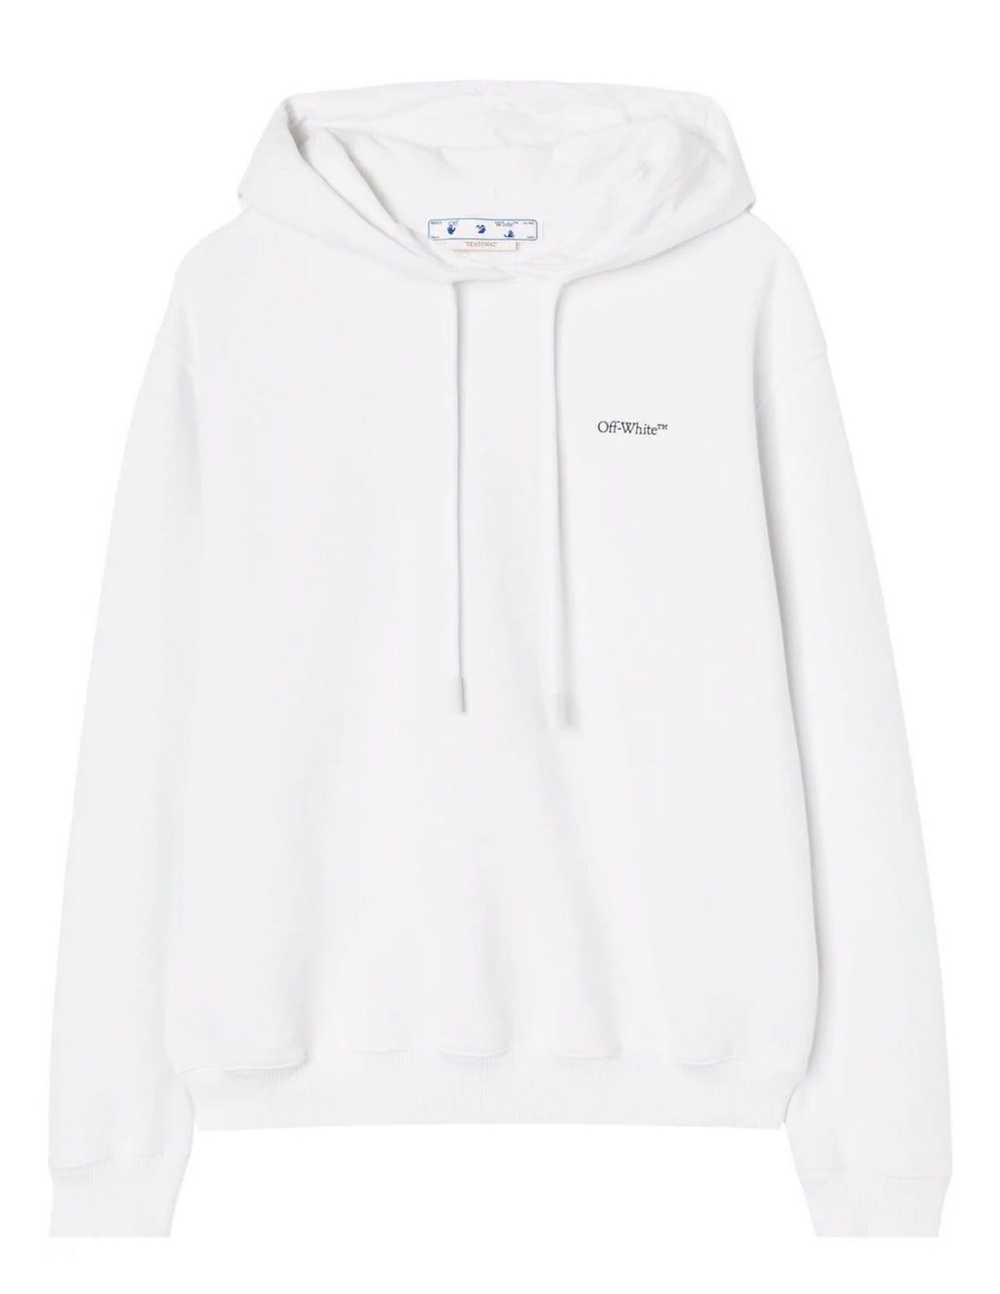 Off-White Off-White Floral Arrows Cotton Hoodie - image 2